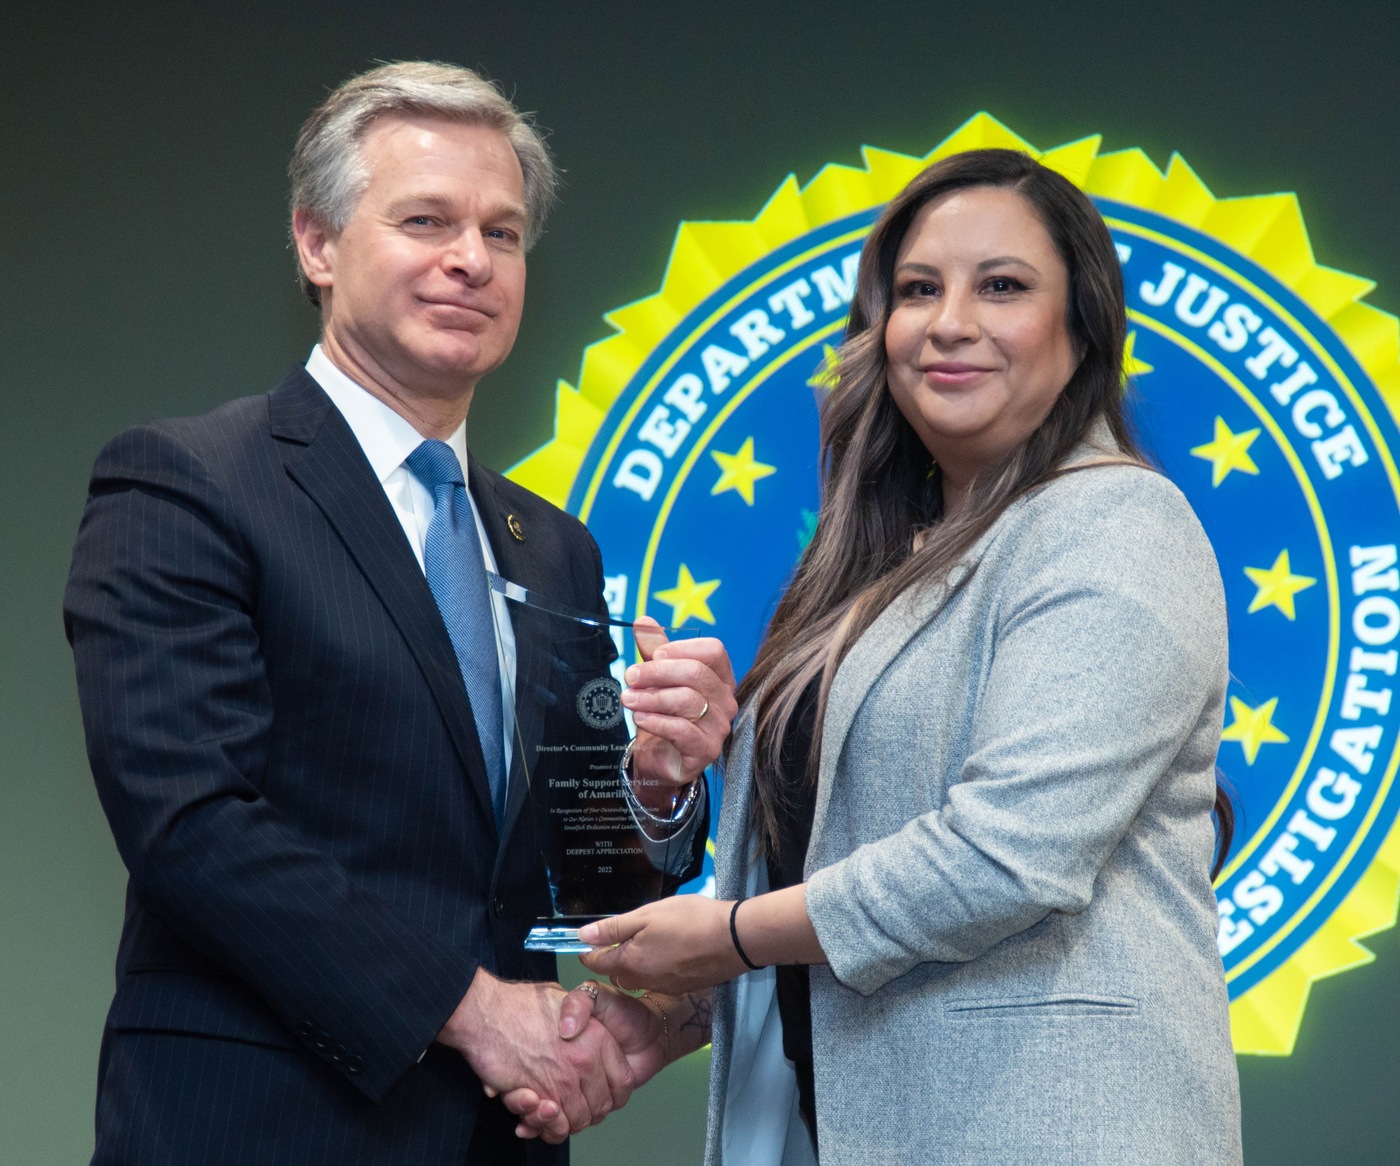 FBI Dallas 2022 Director’s Community Leadership Award recipient Family Support Services of Amarillo, represented by Lus Chavez.